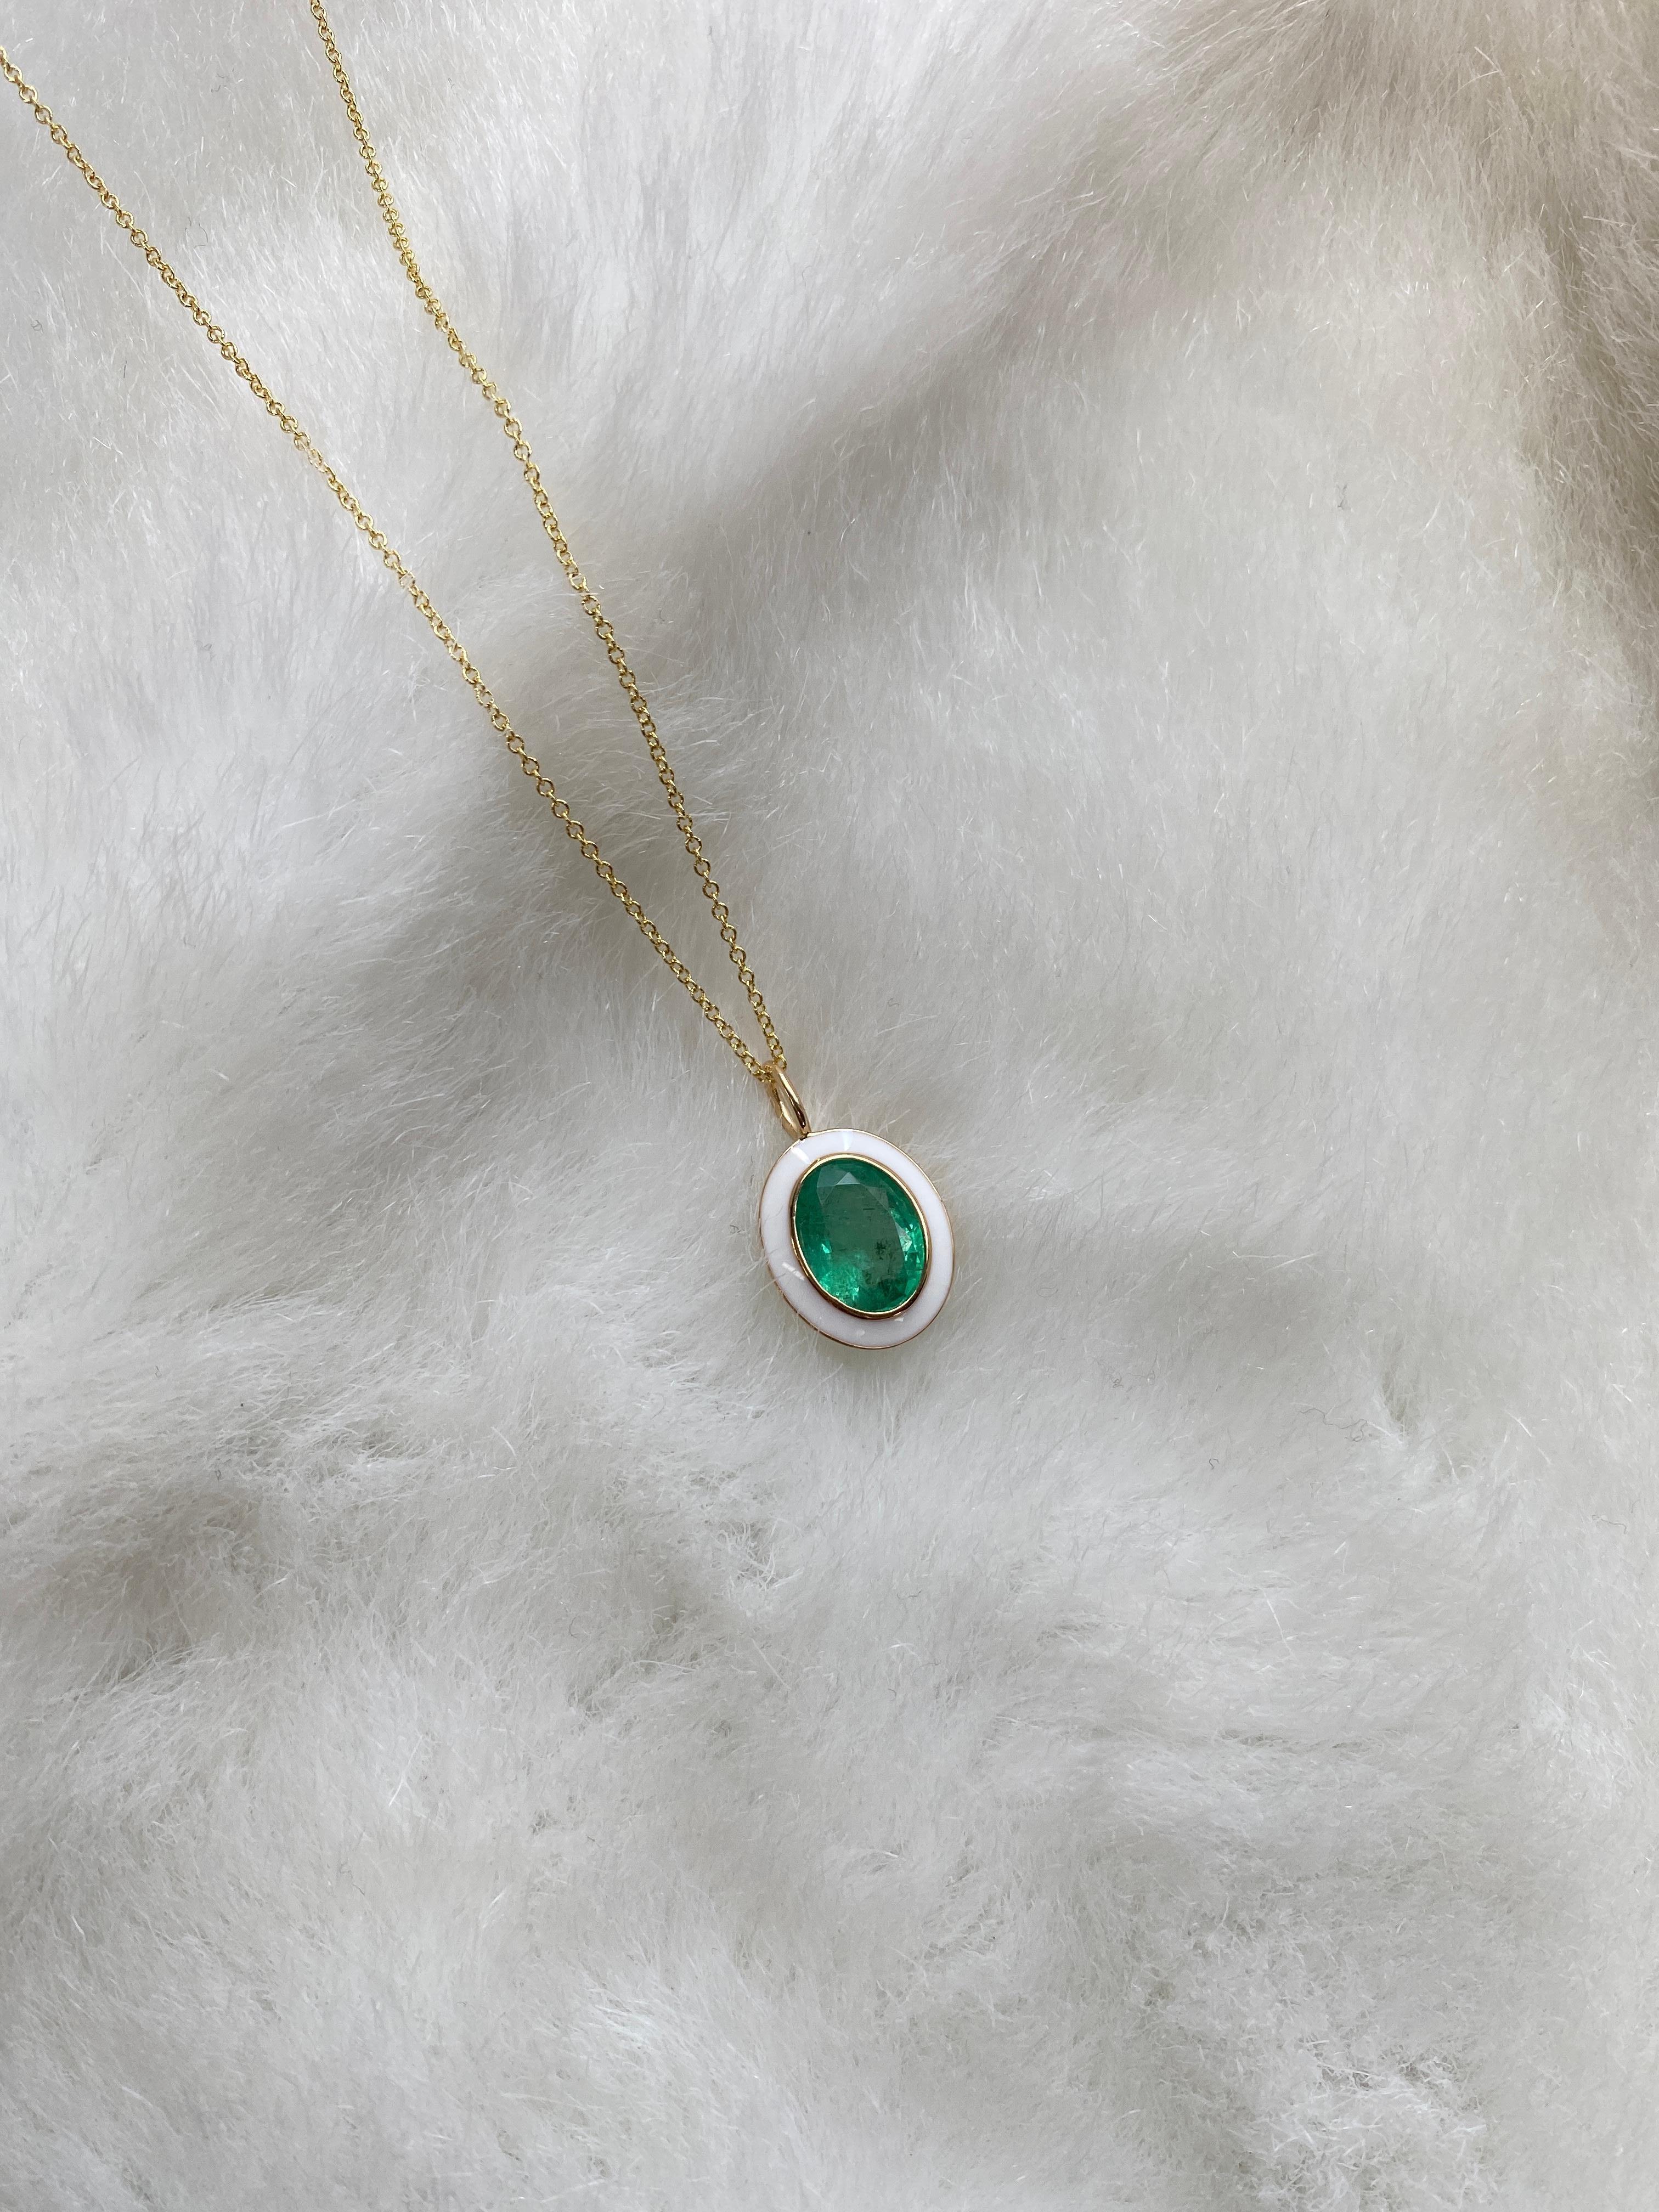 Emerald Oval Pendant with White Enamel in 18K Yellow Gold, from 'Queen' Collection. The combination of enamel, and Emerald represents power, richness and passion of a true Queen. The feeling of luxury is what we’re aiming for, but at a price point